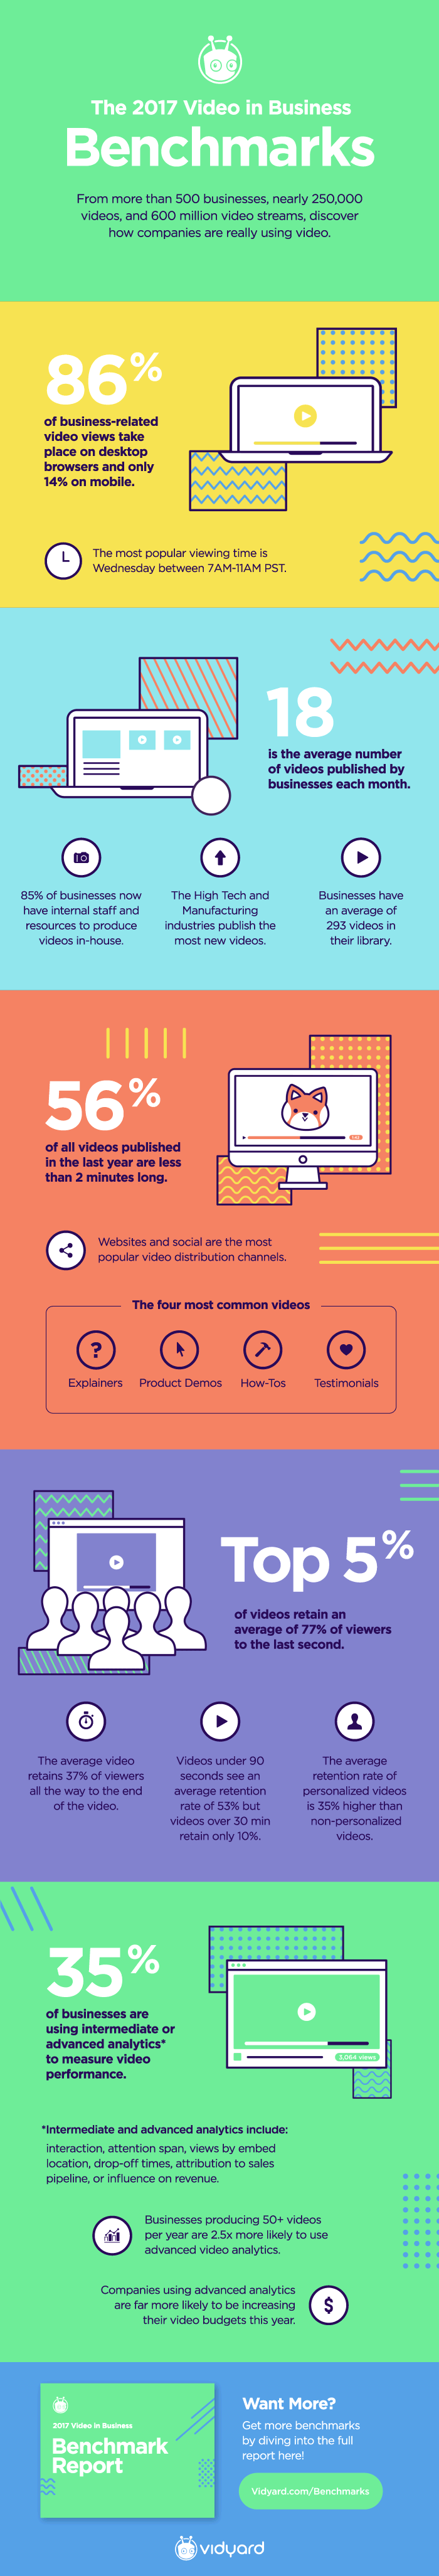 video business benchmarks